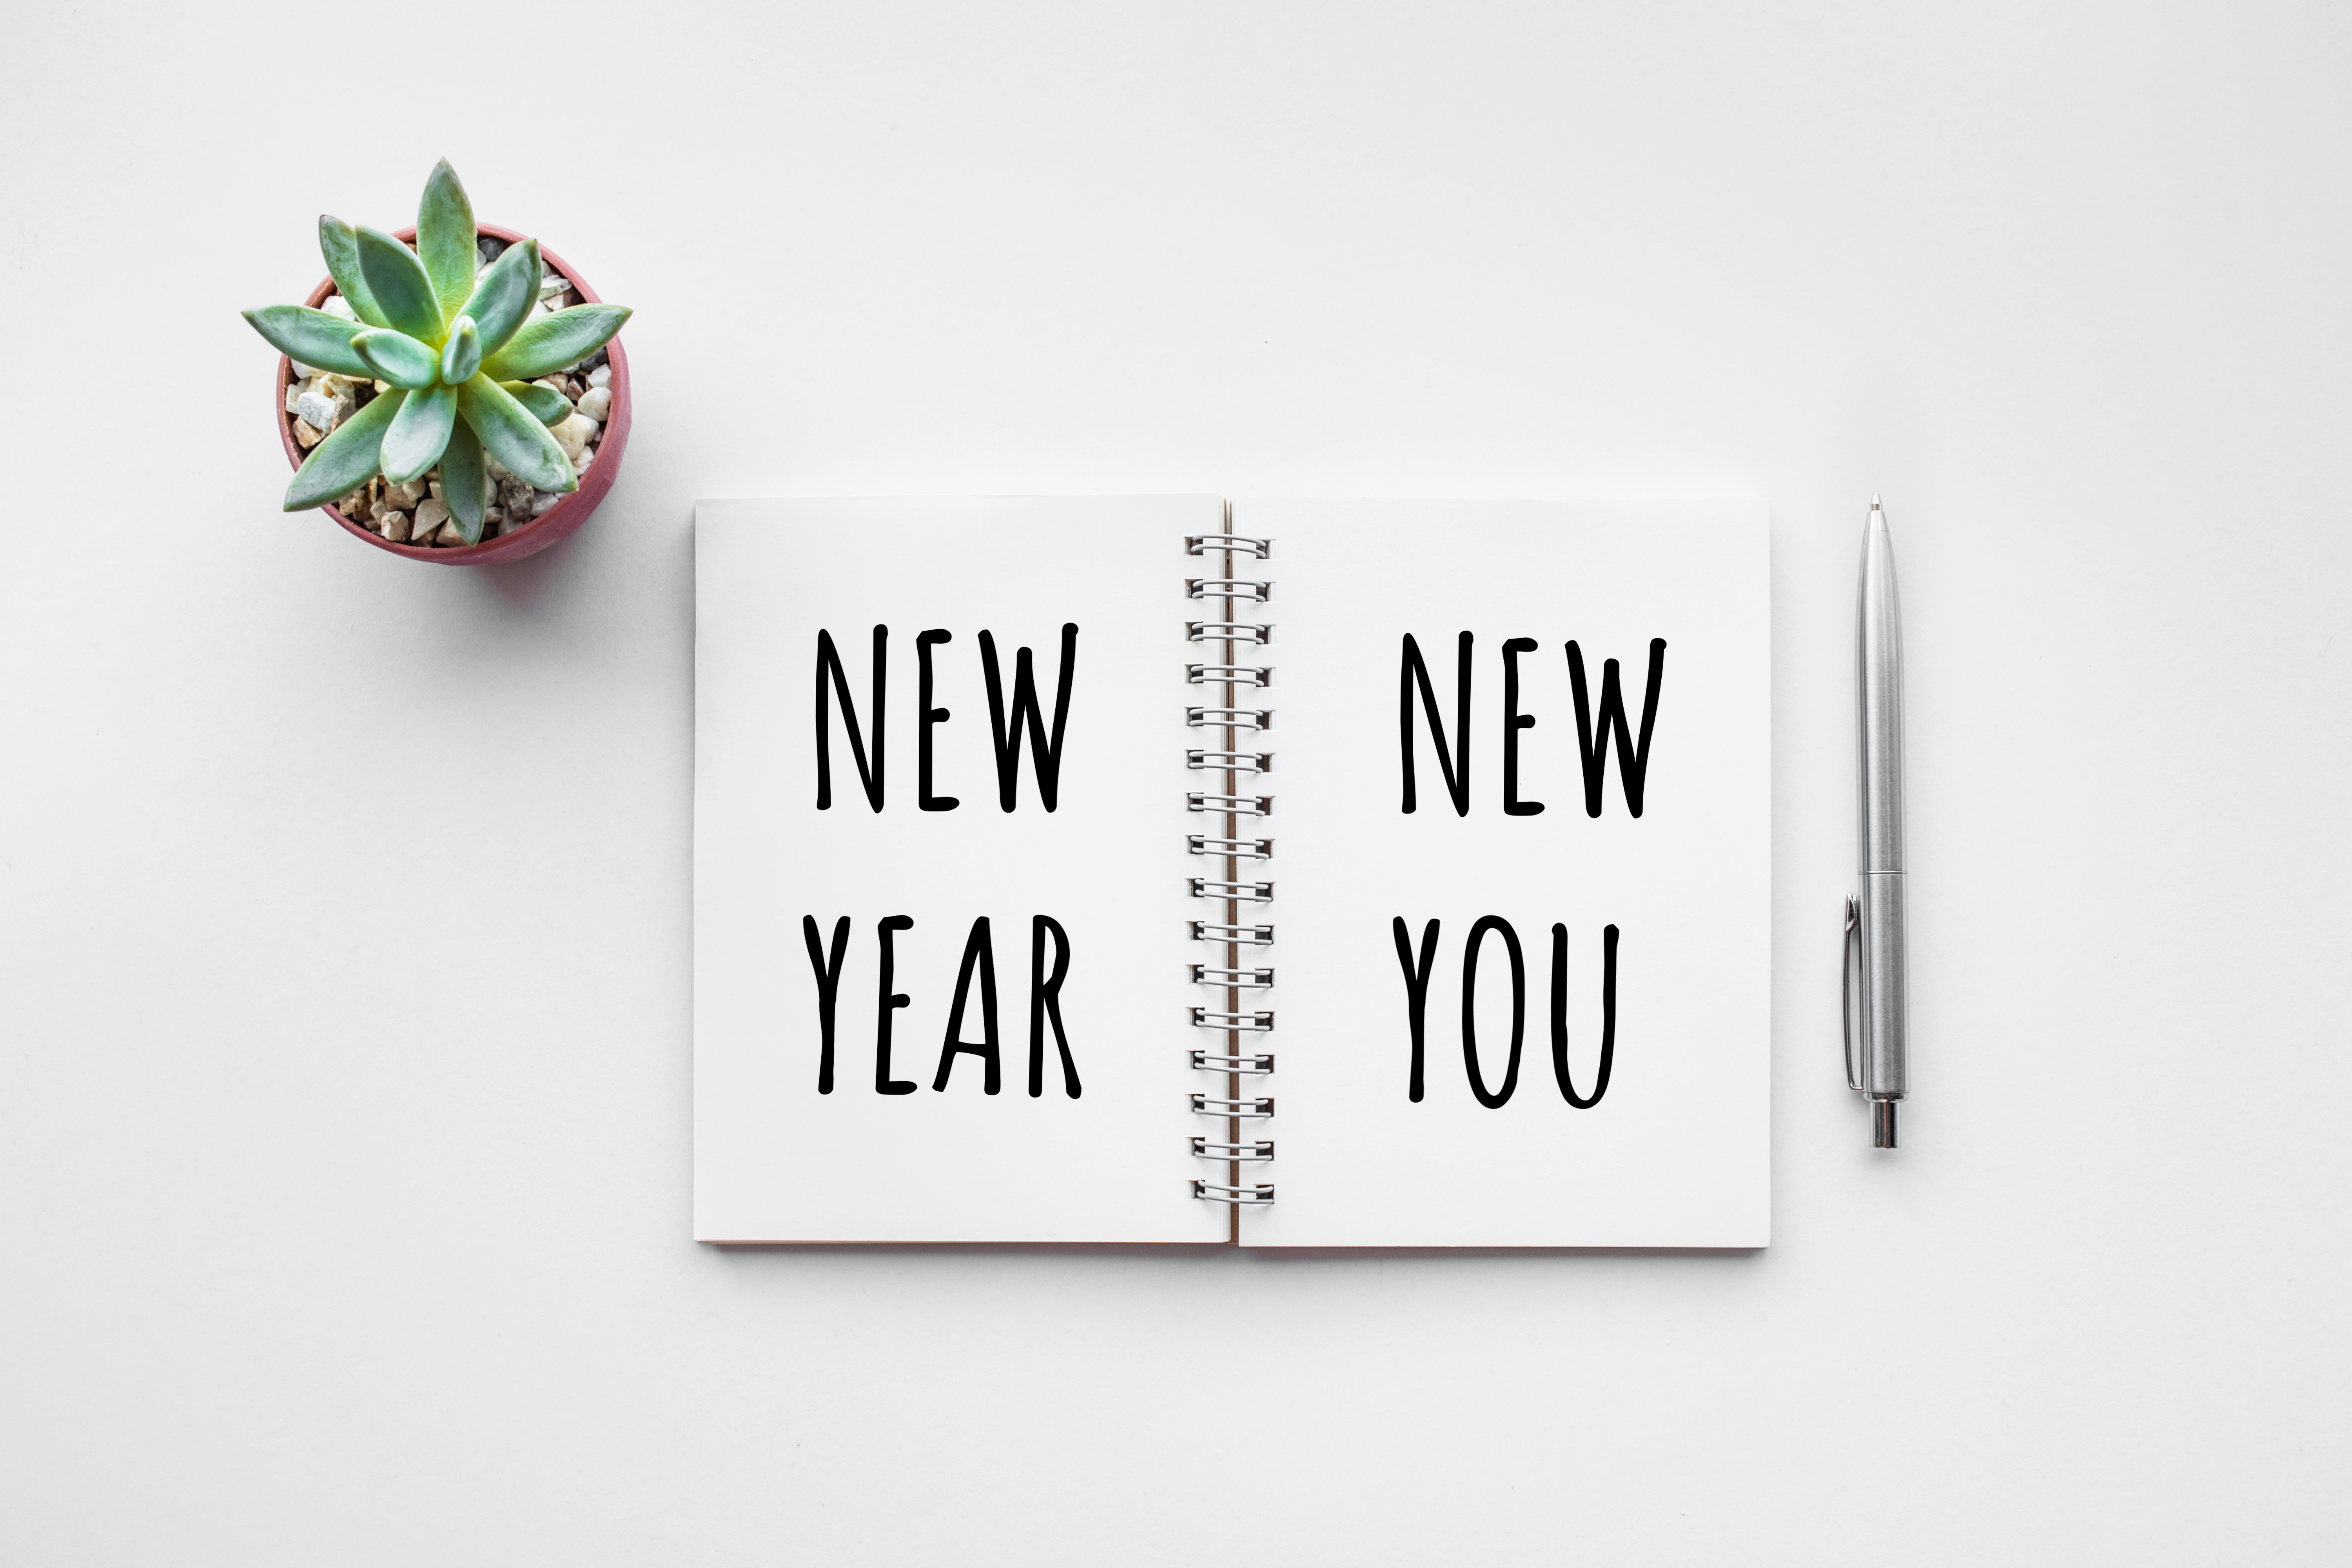 Book displaying 'New Year, New You'